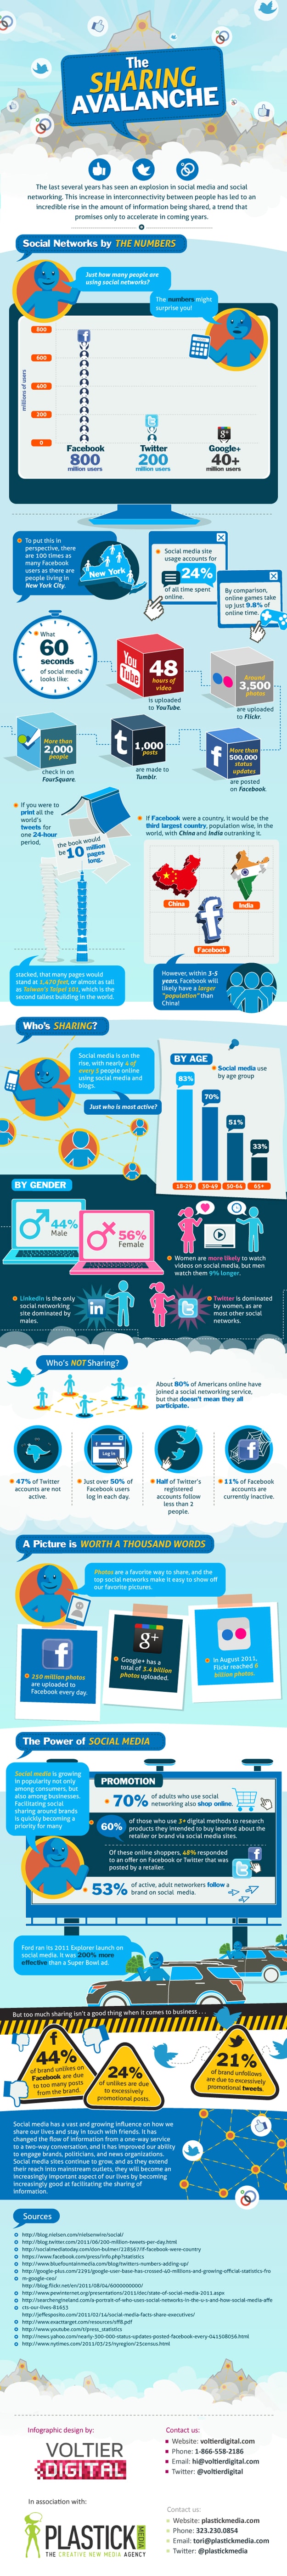 Social Media Sharing: Who Shares Where Online [Infographic]